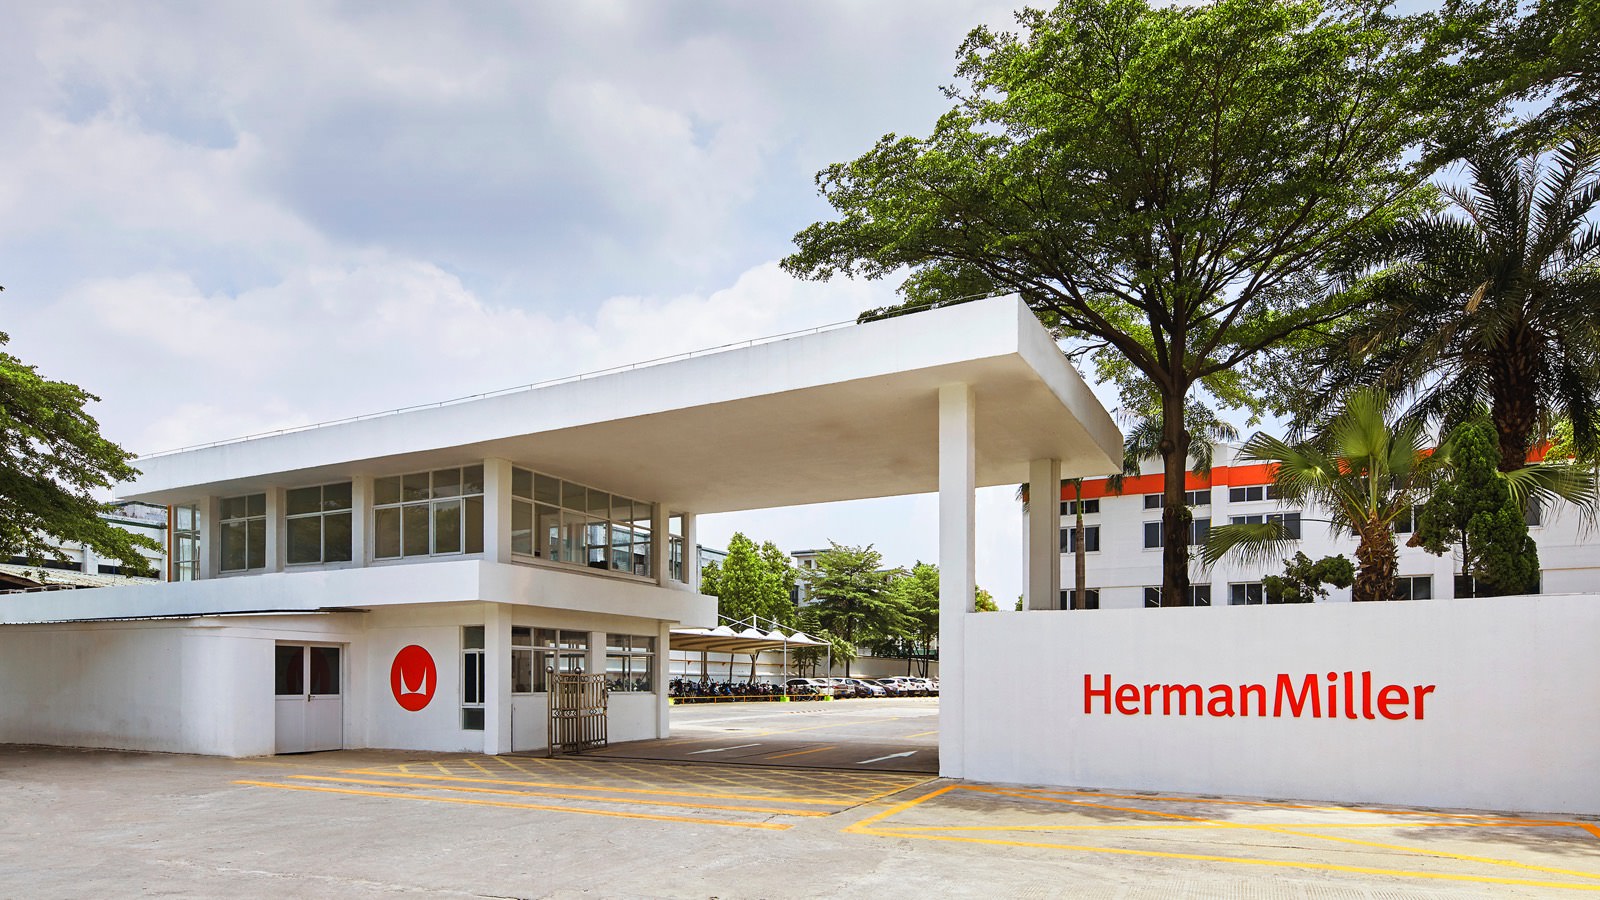 The Herman Miller manufacturing facility in Dongguan, China, featuring the Herman Miller logo in red.